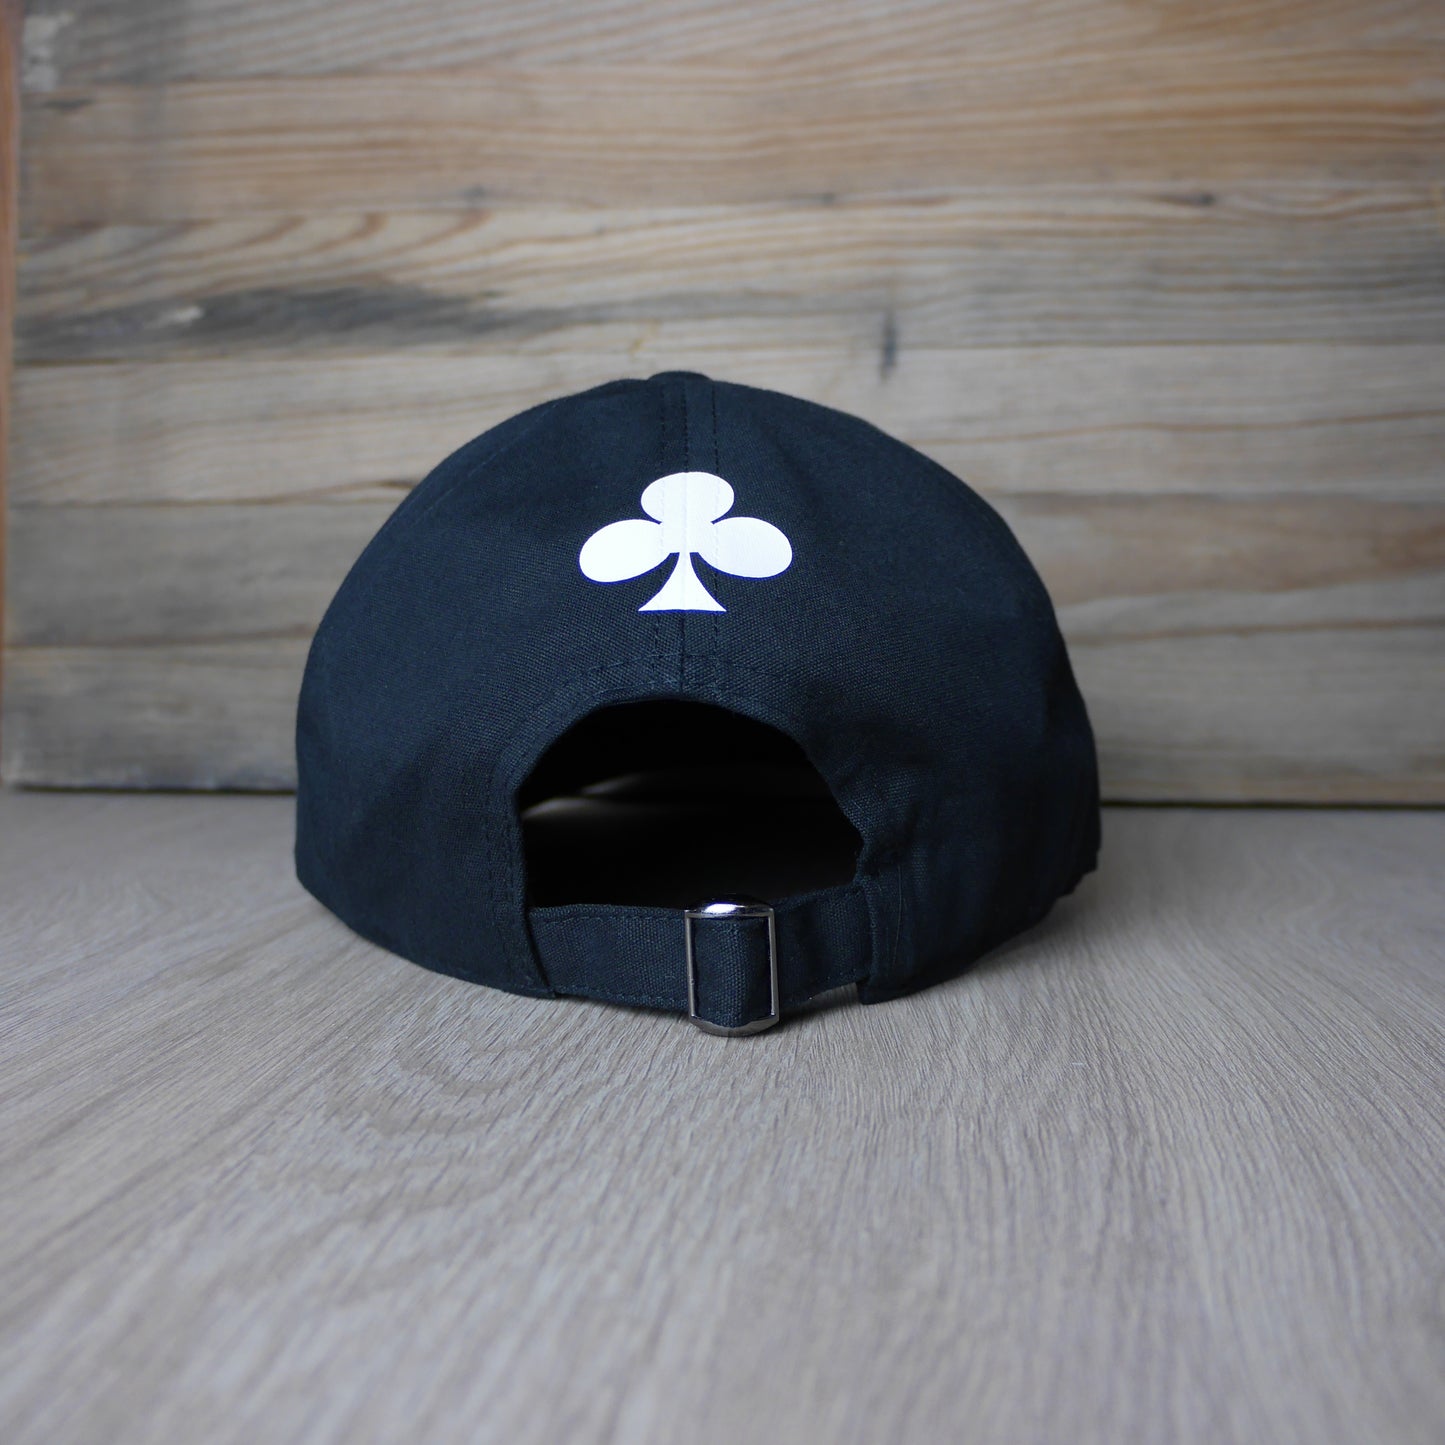 Casquette Ace Of Clubs Painting